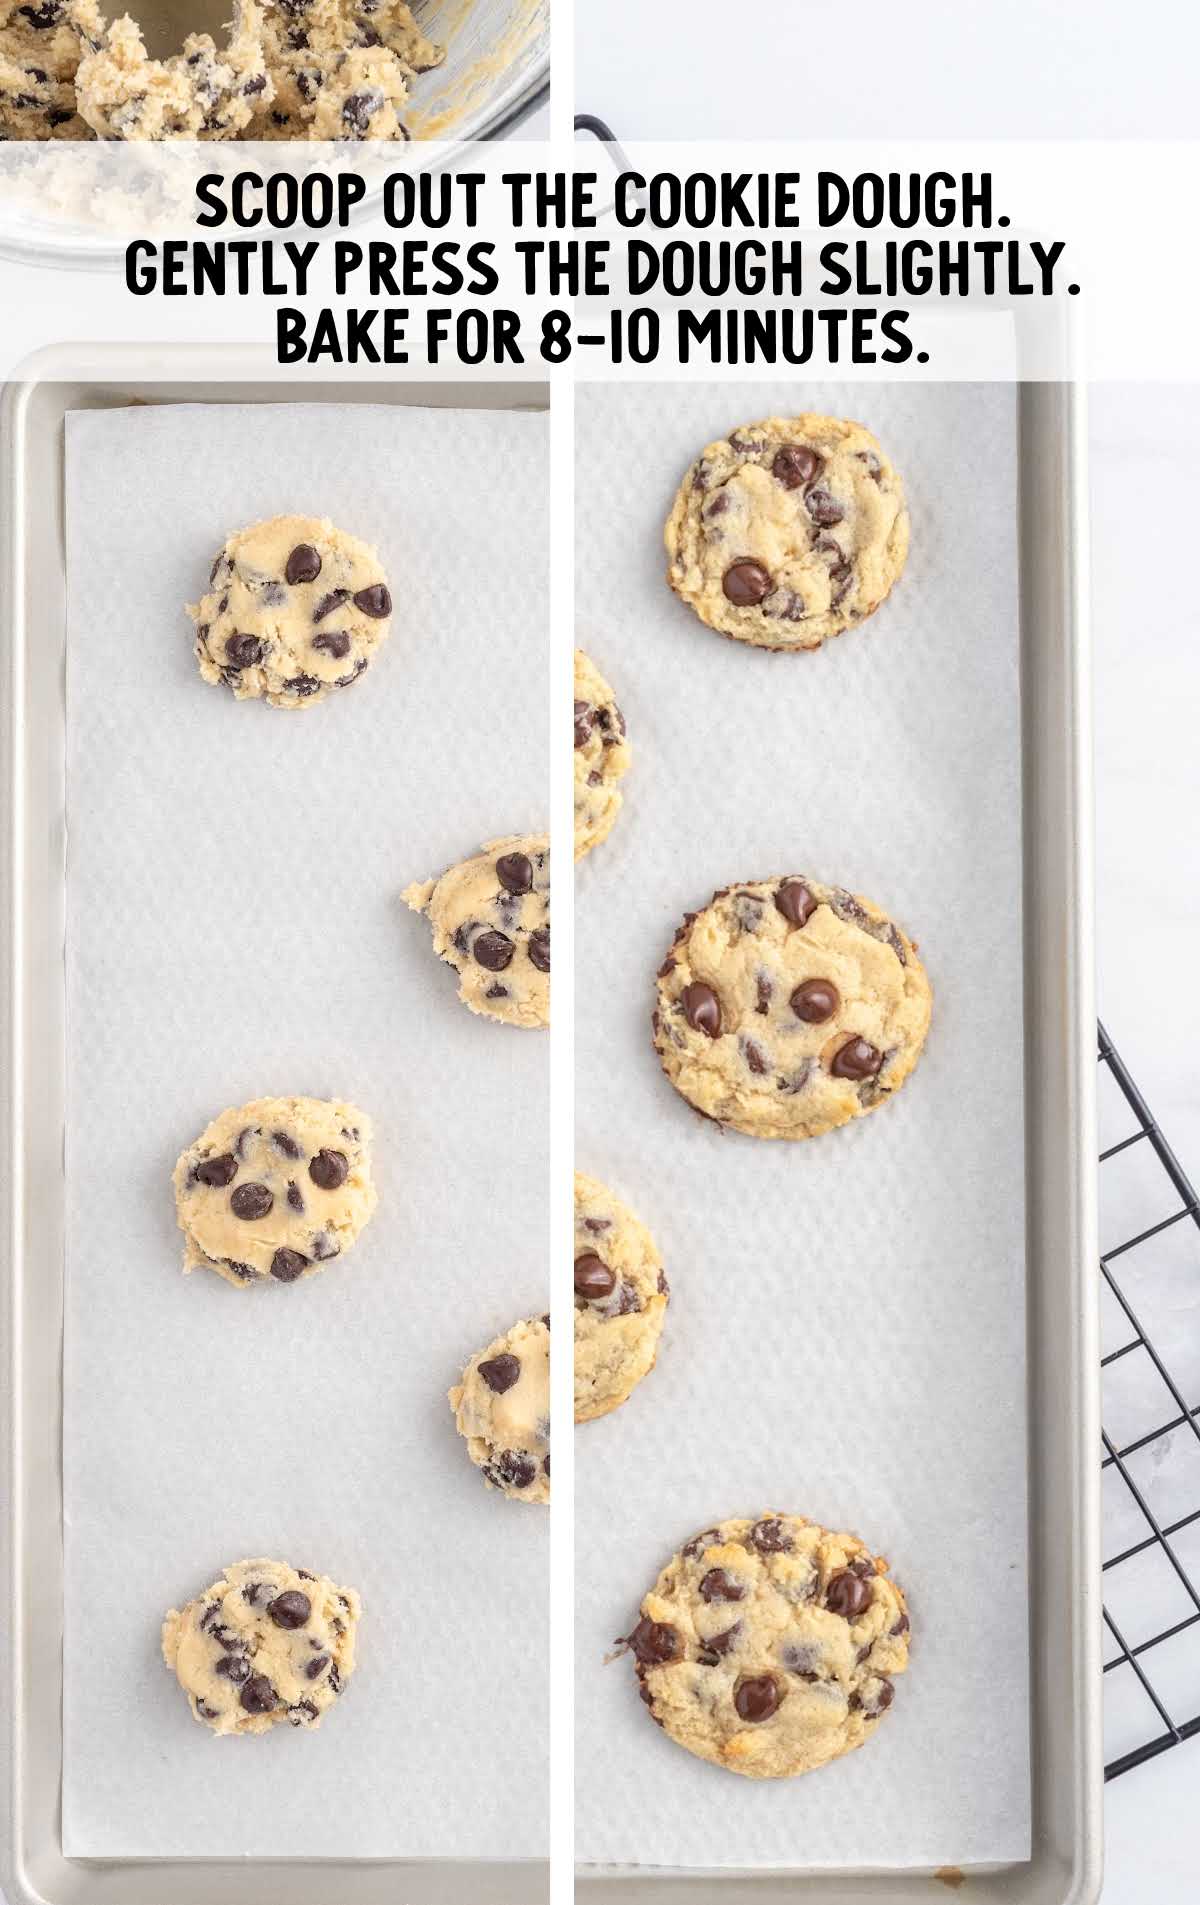 baked cookies on a baking tray